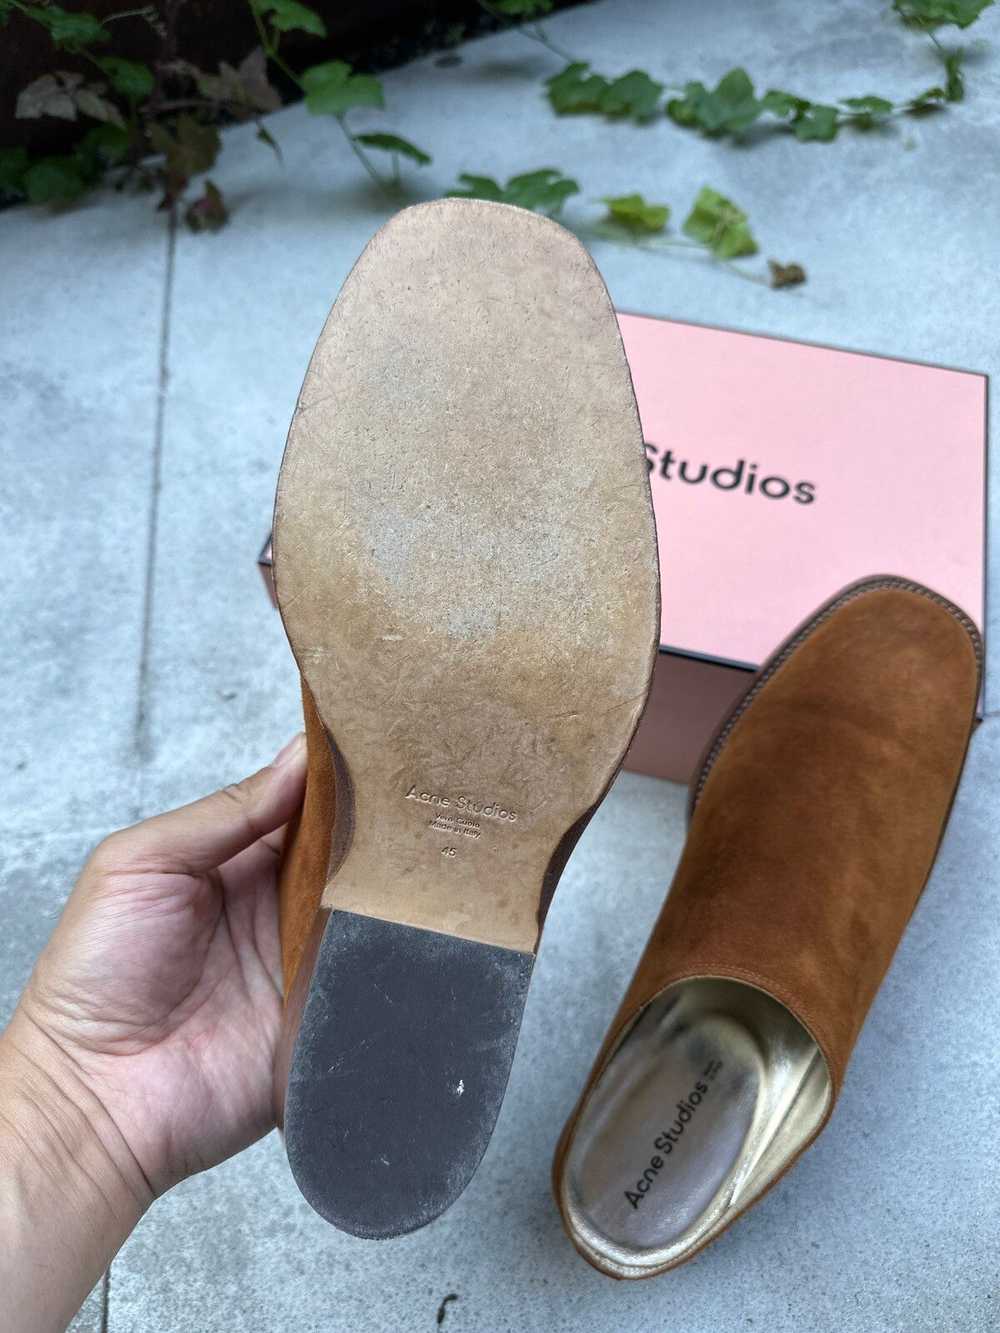 Acne Studios Like a New! Suede Sandal - image 7